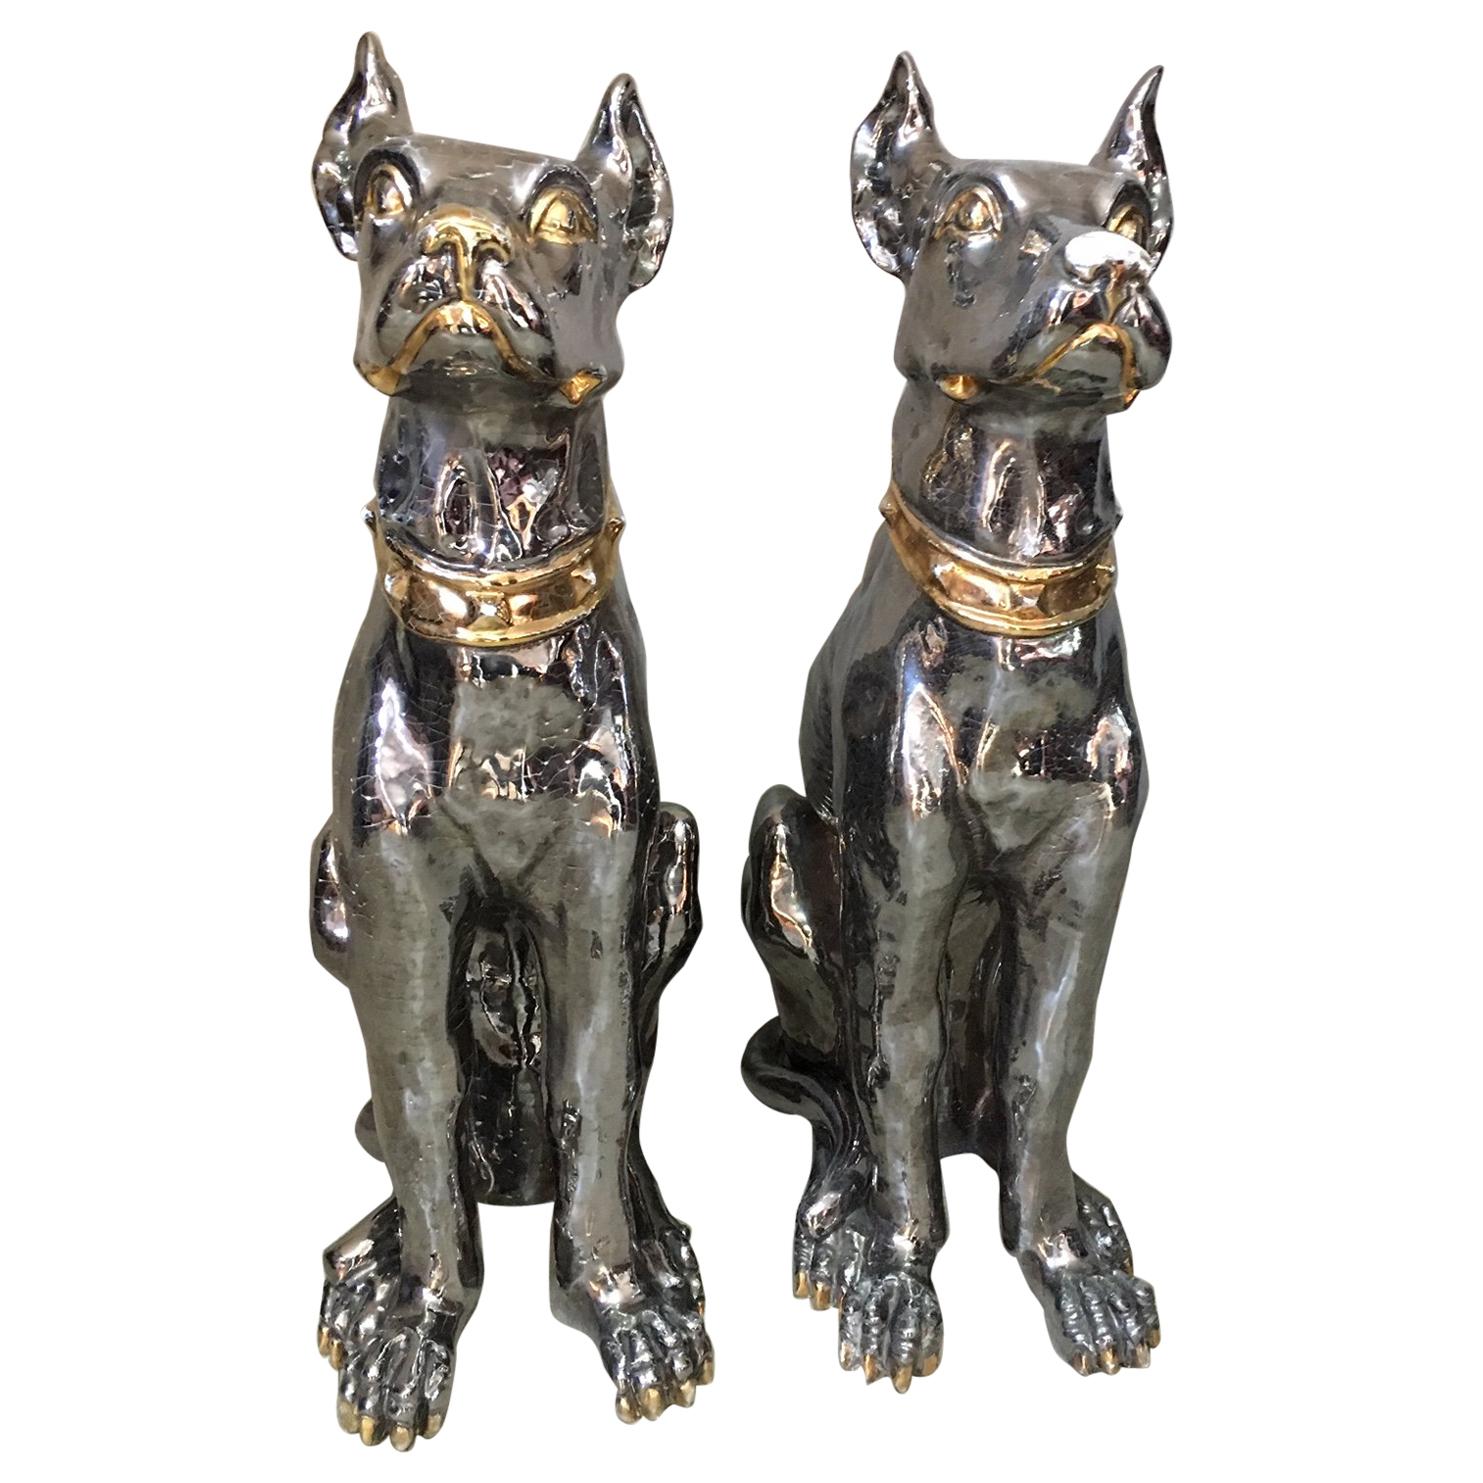 20th Century Italian Pair of Silver and Golden Ceramic Dogs